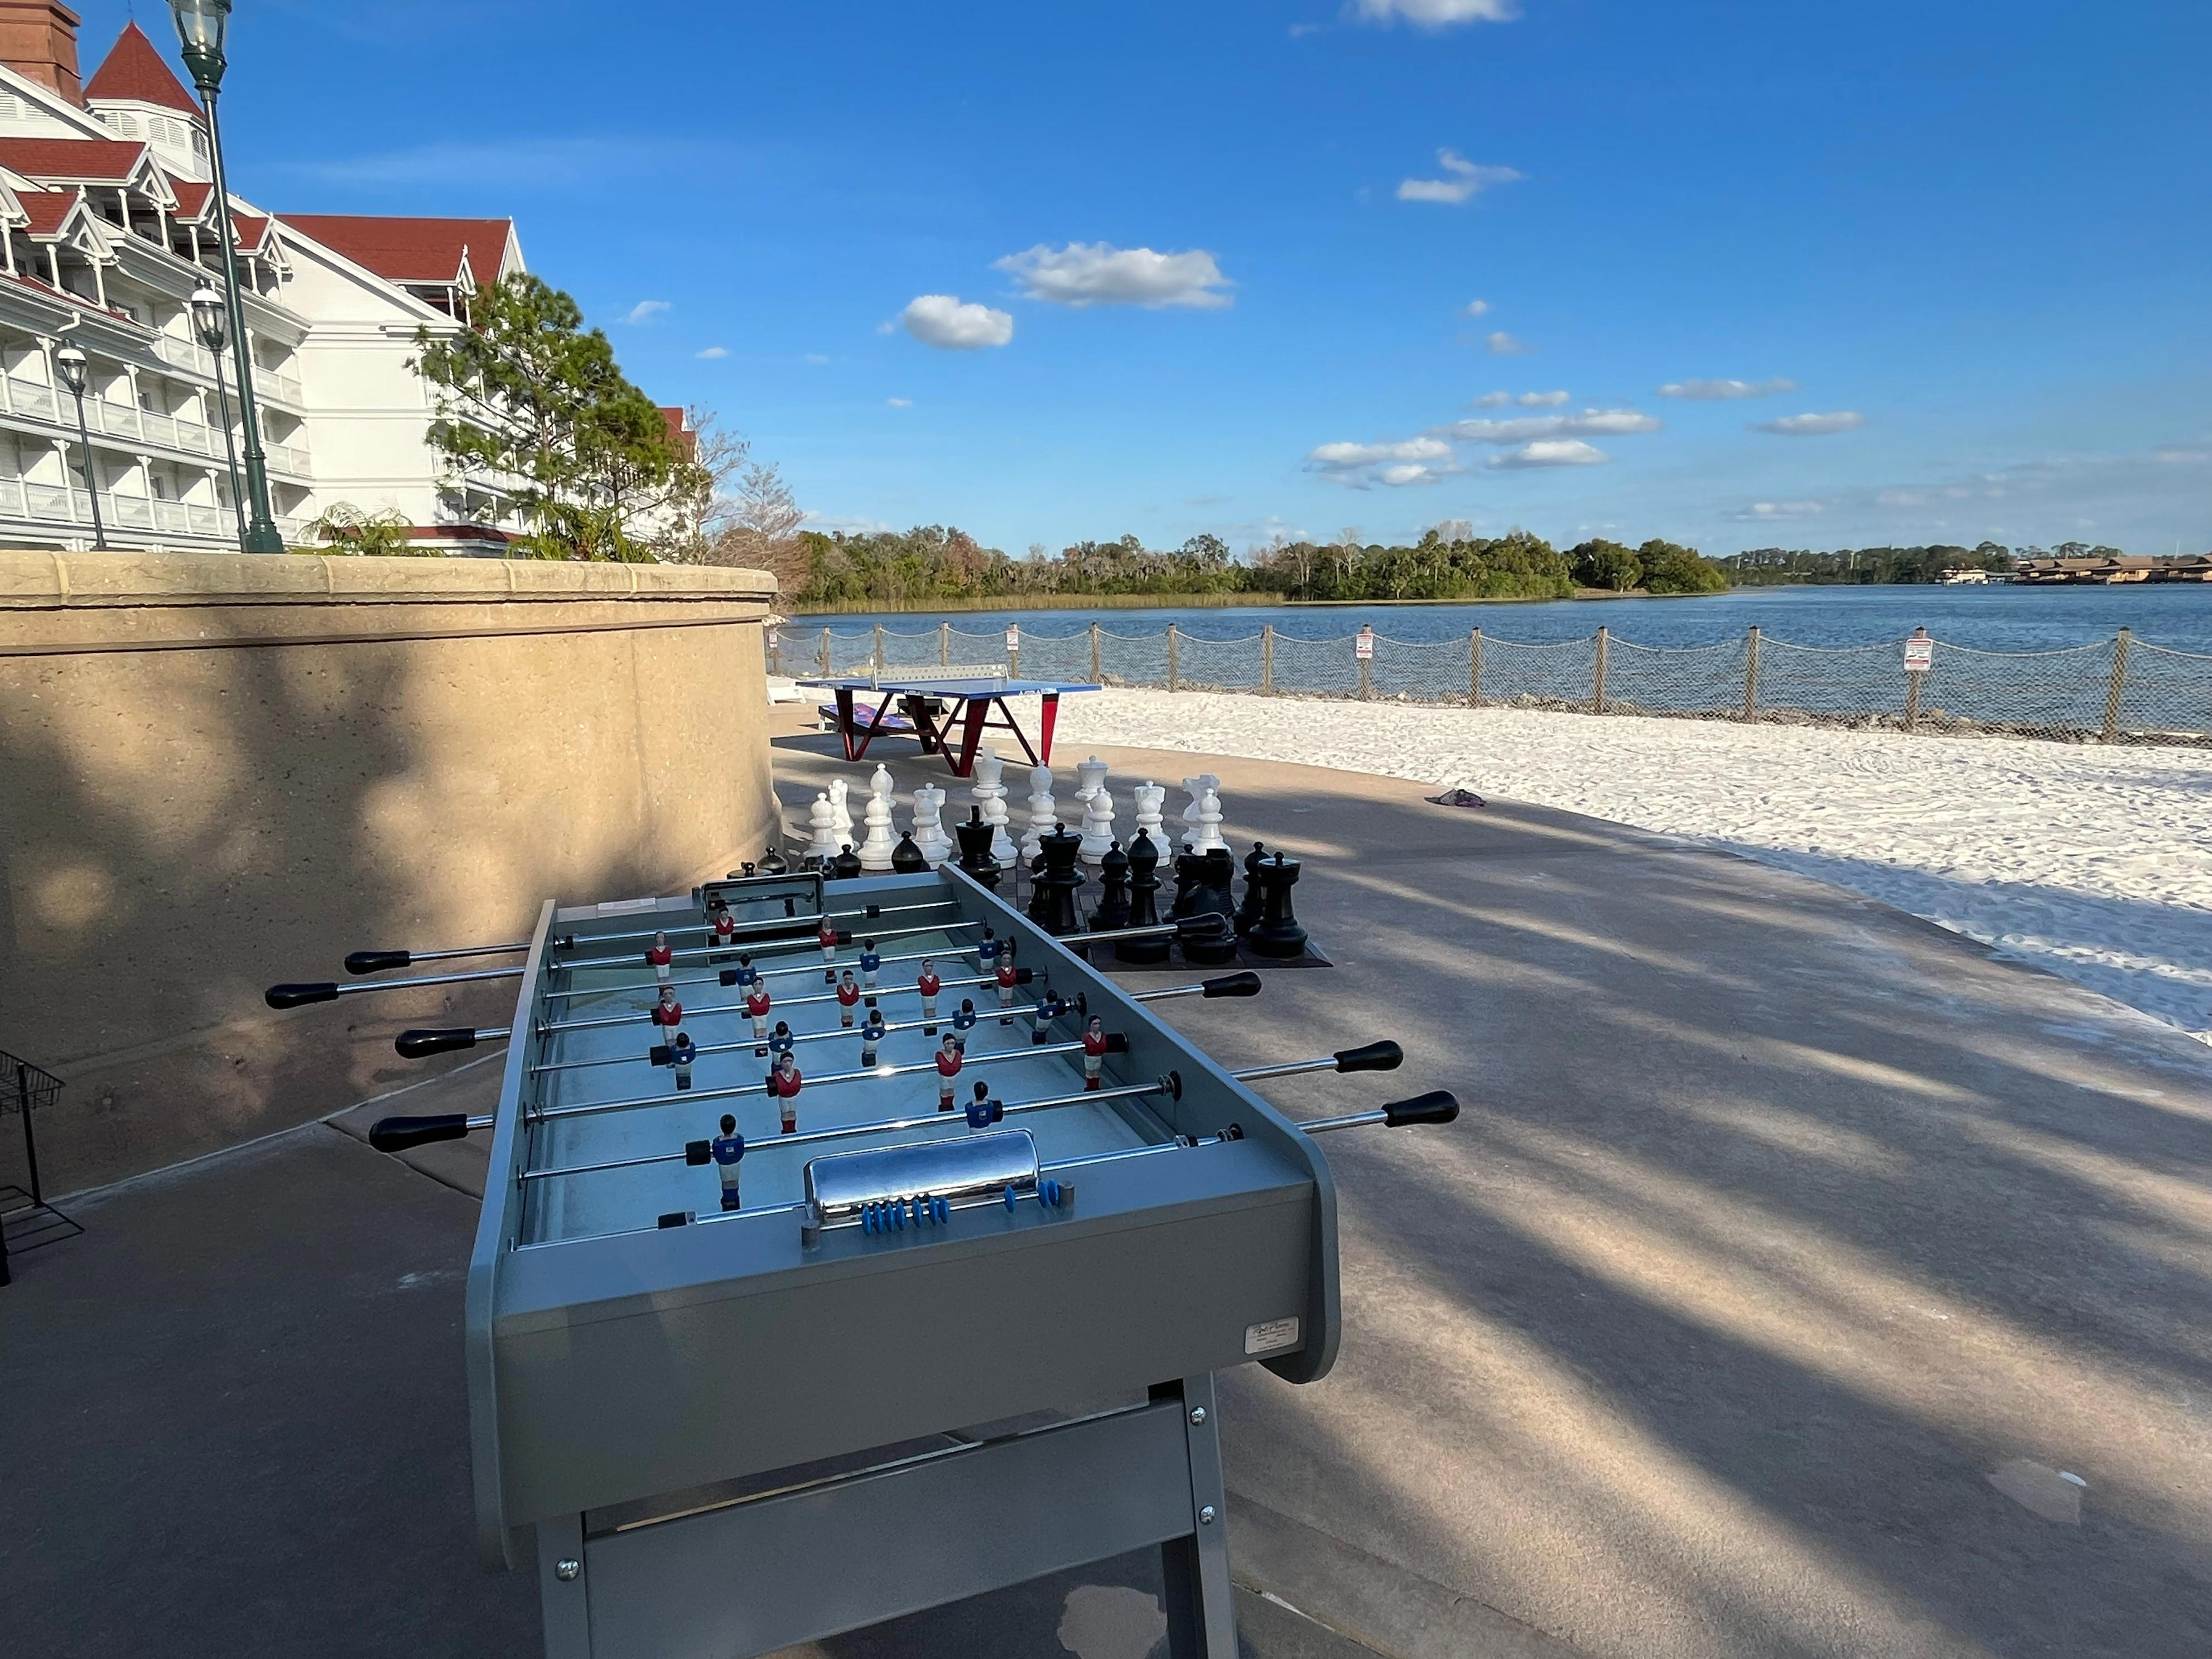 <p>I didn't get too close because I didn't want to get all full of sand before dinner. But I noticed the resort had games available by the beach, including foosball, chess, and cornhole.</p>